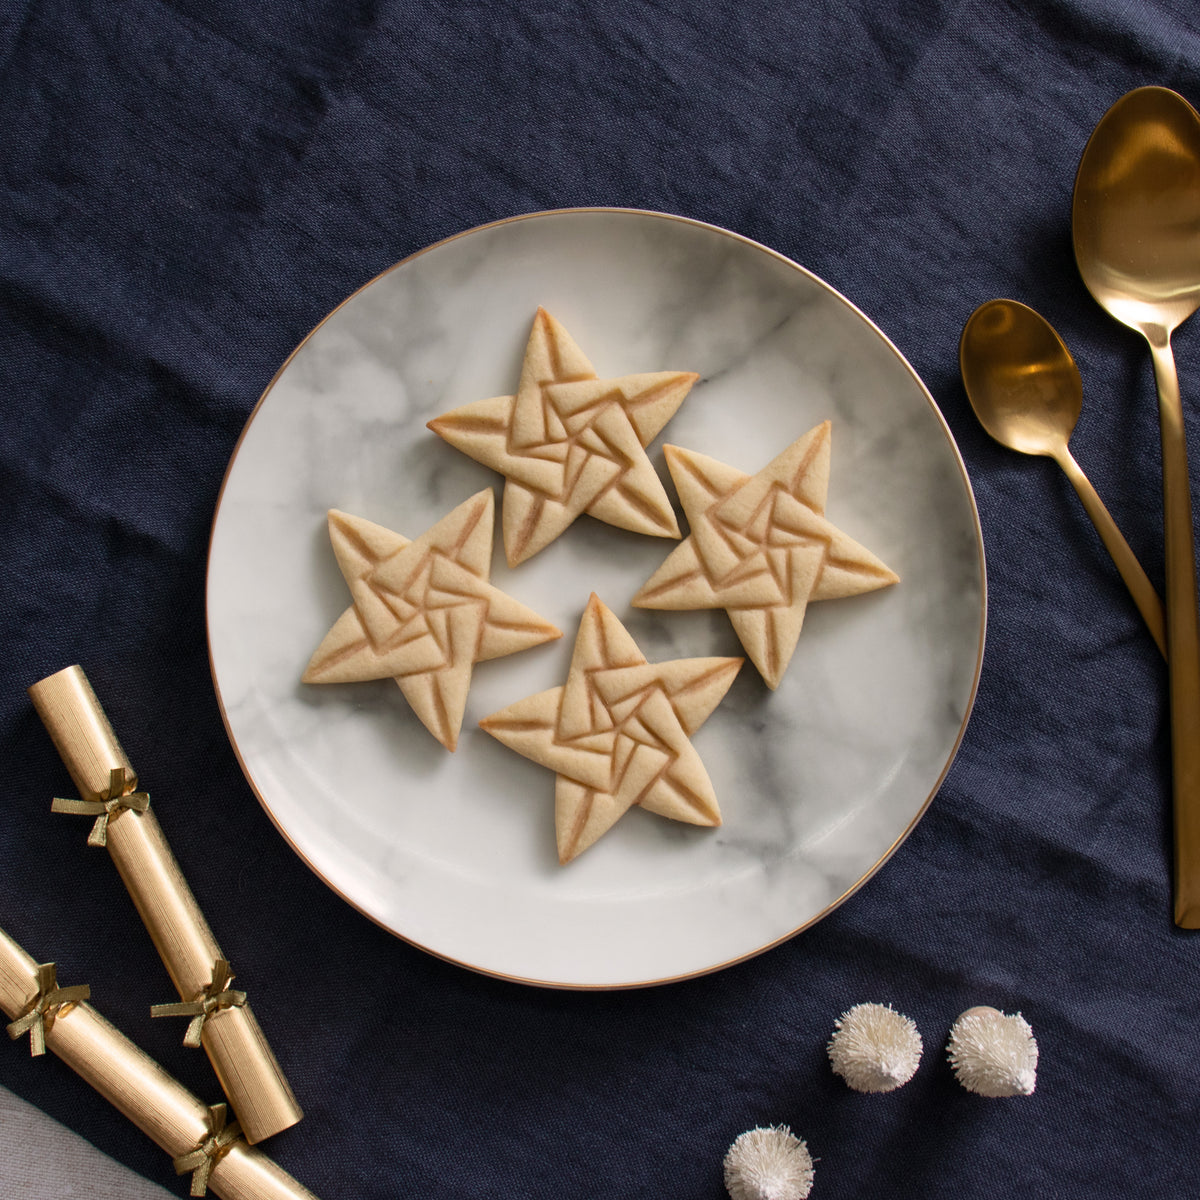 5 sided origami star style 1 christmas cookies